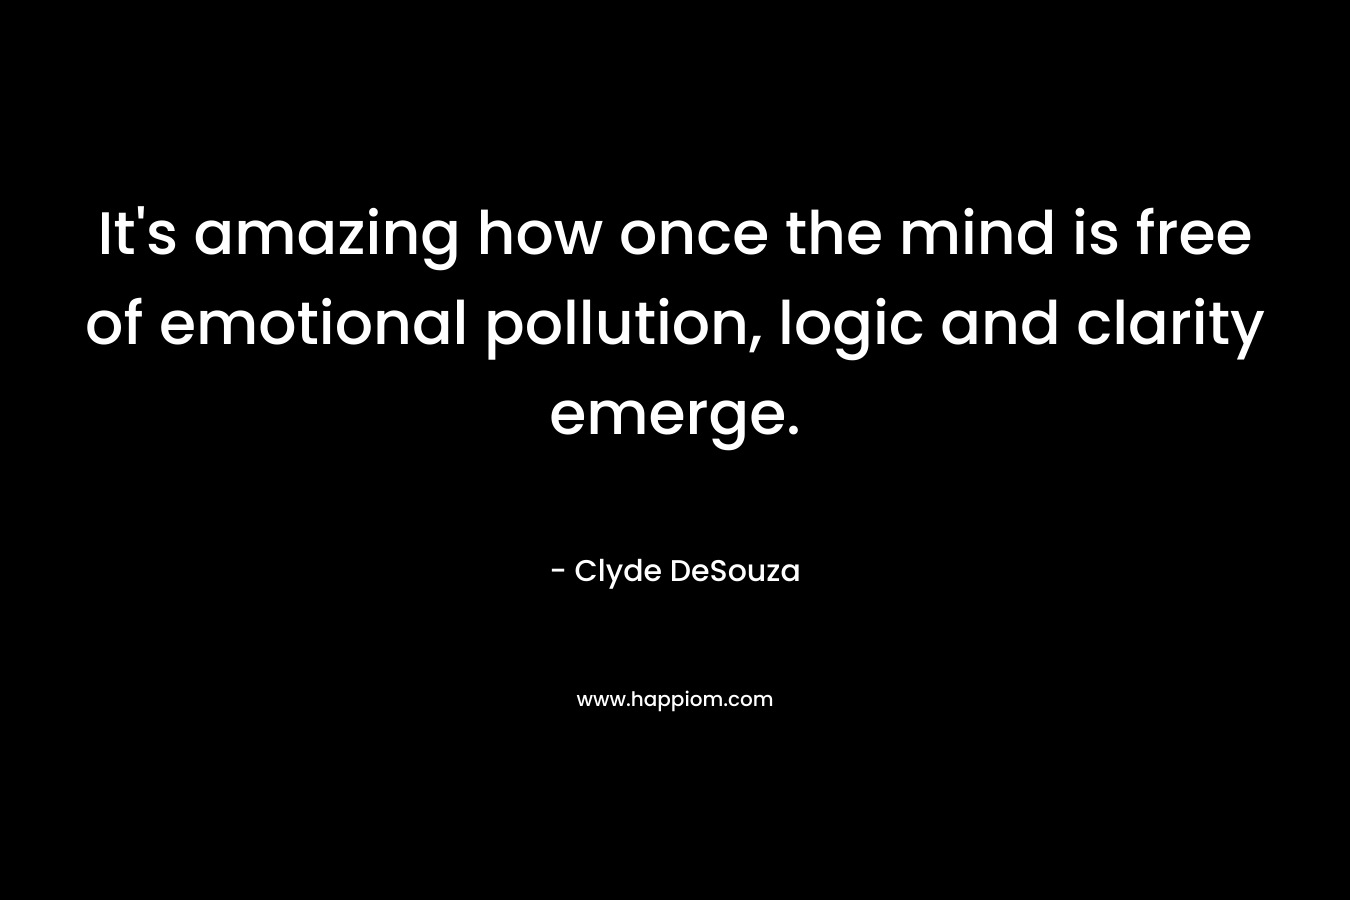 It's amazing how once the mind is free of emotional pollution, logic and clarity emerge.